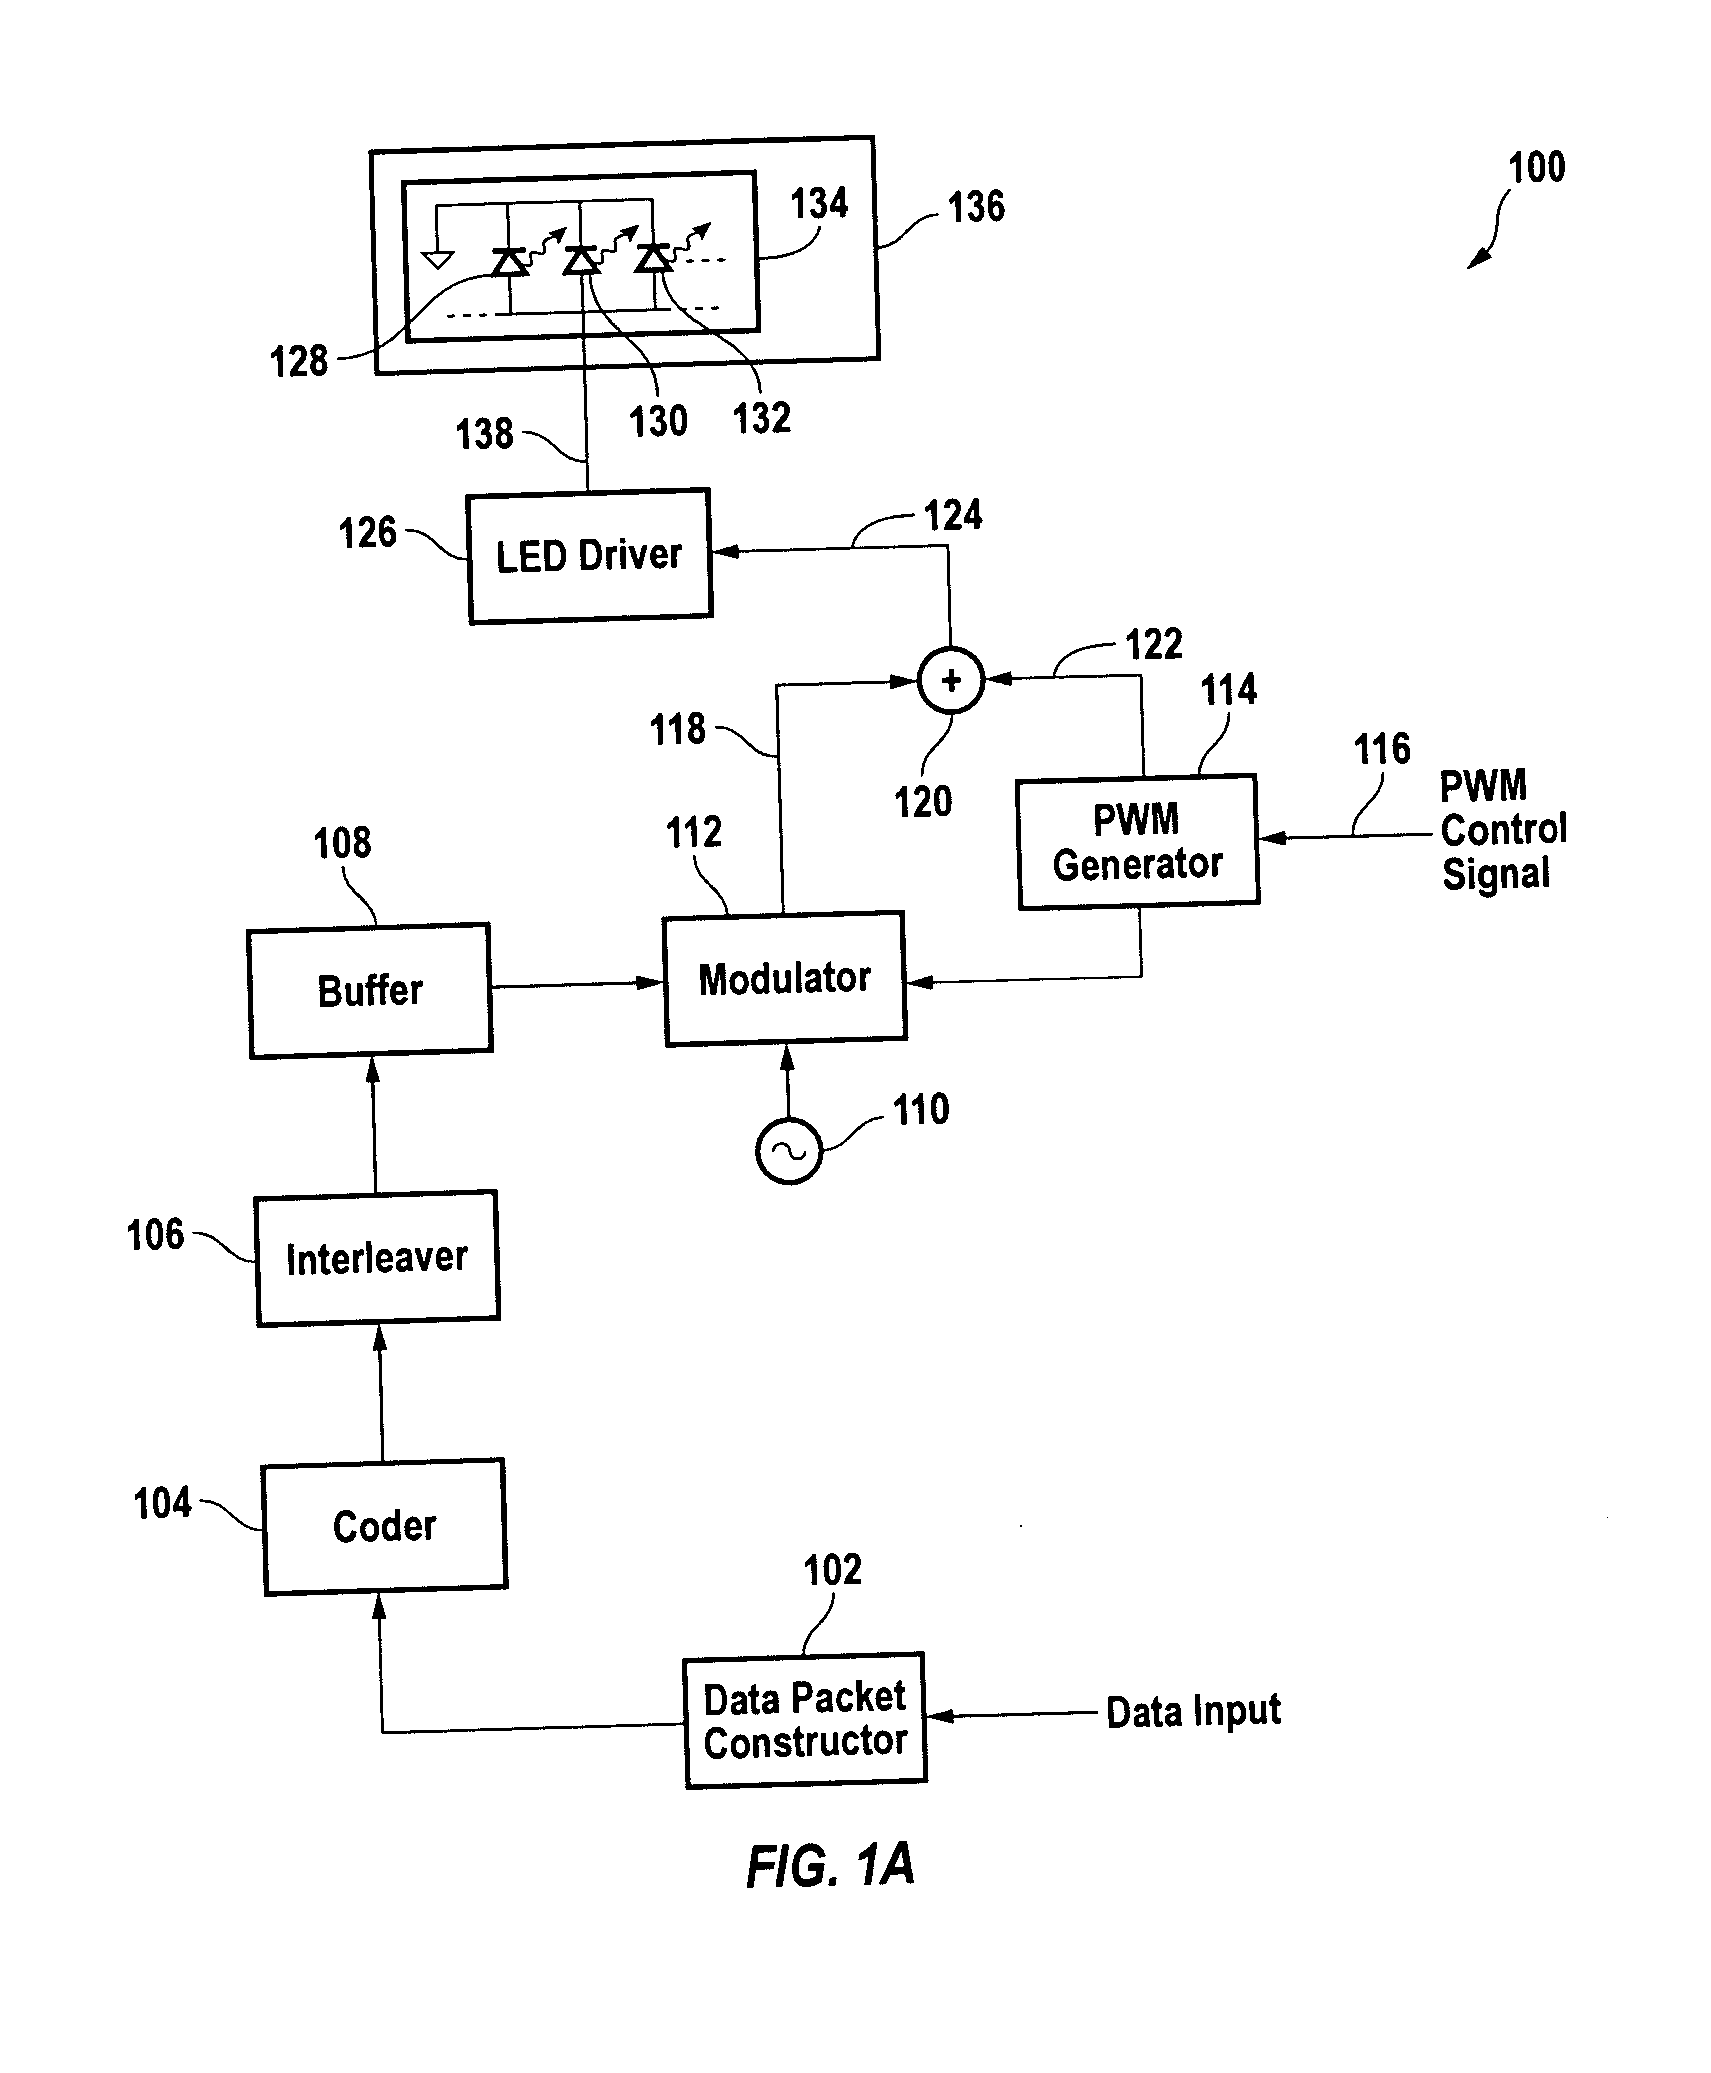 Method and apparatus for communication using pulse-width-modulated visible light